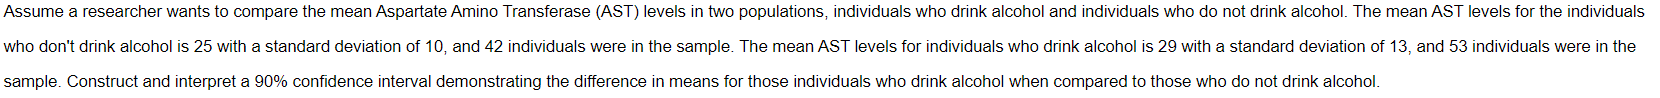 Assume a researcher wants to compare the mean Aspartate Amino Transferase (AST) levels in two populations, individuals who drink alcohol and individuals who do not drink alcohol. The mean AST levels for the individuals
who don't drink alcohol is 25 with a standard deviation of 10, and 42 individuals were in the sample. The mean AST levels for individuals who drink alcohol is 29 with a standard deviation of 13, and 53 individuals were in the
sample, Construct and interpret a 90% confidence interval demonstrating the difference in means for those individuals who drink alcohol when compared to those who do not drink alcohol.
